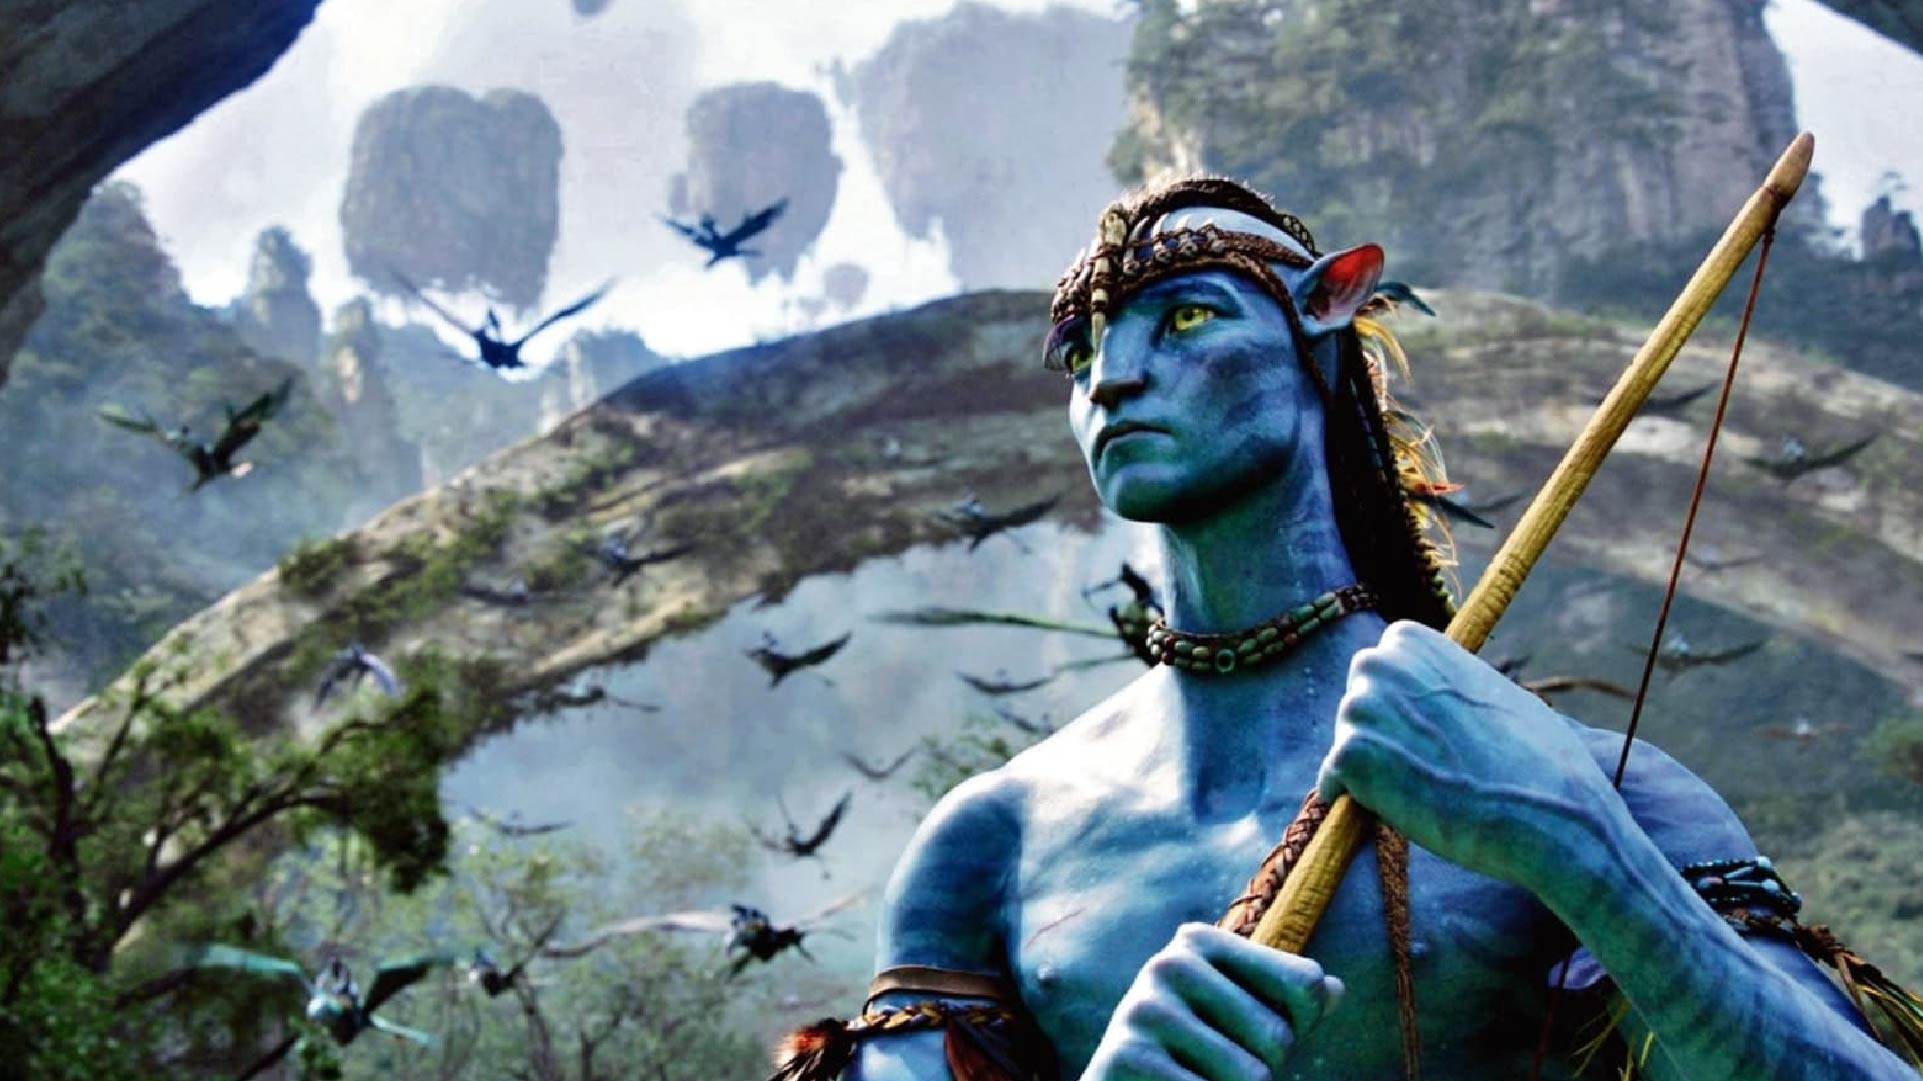 School’s Out! Watch Avatar: The Way of Water With the Kids. Here’s Why